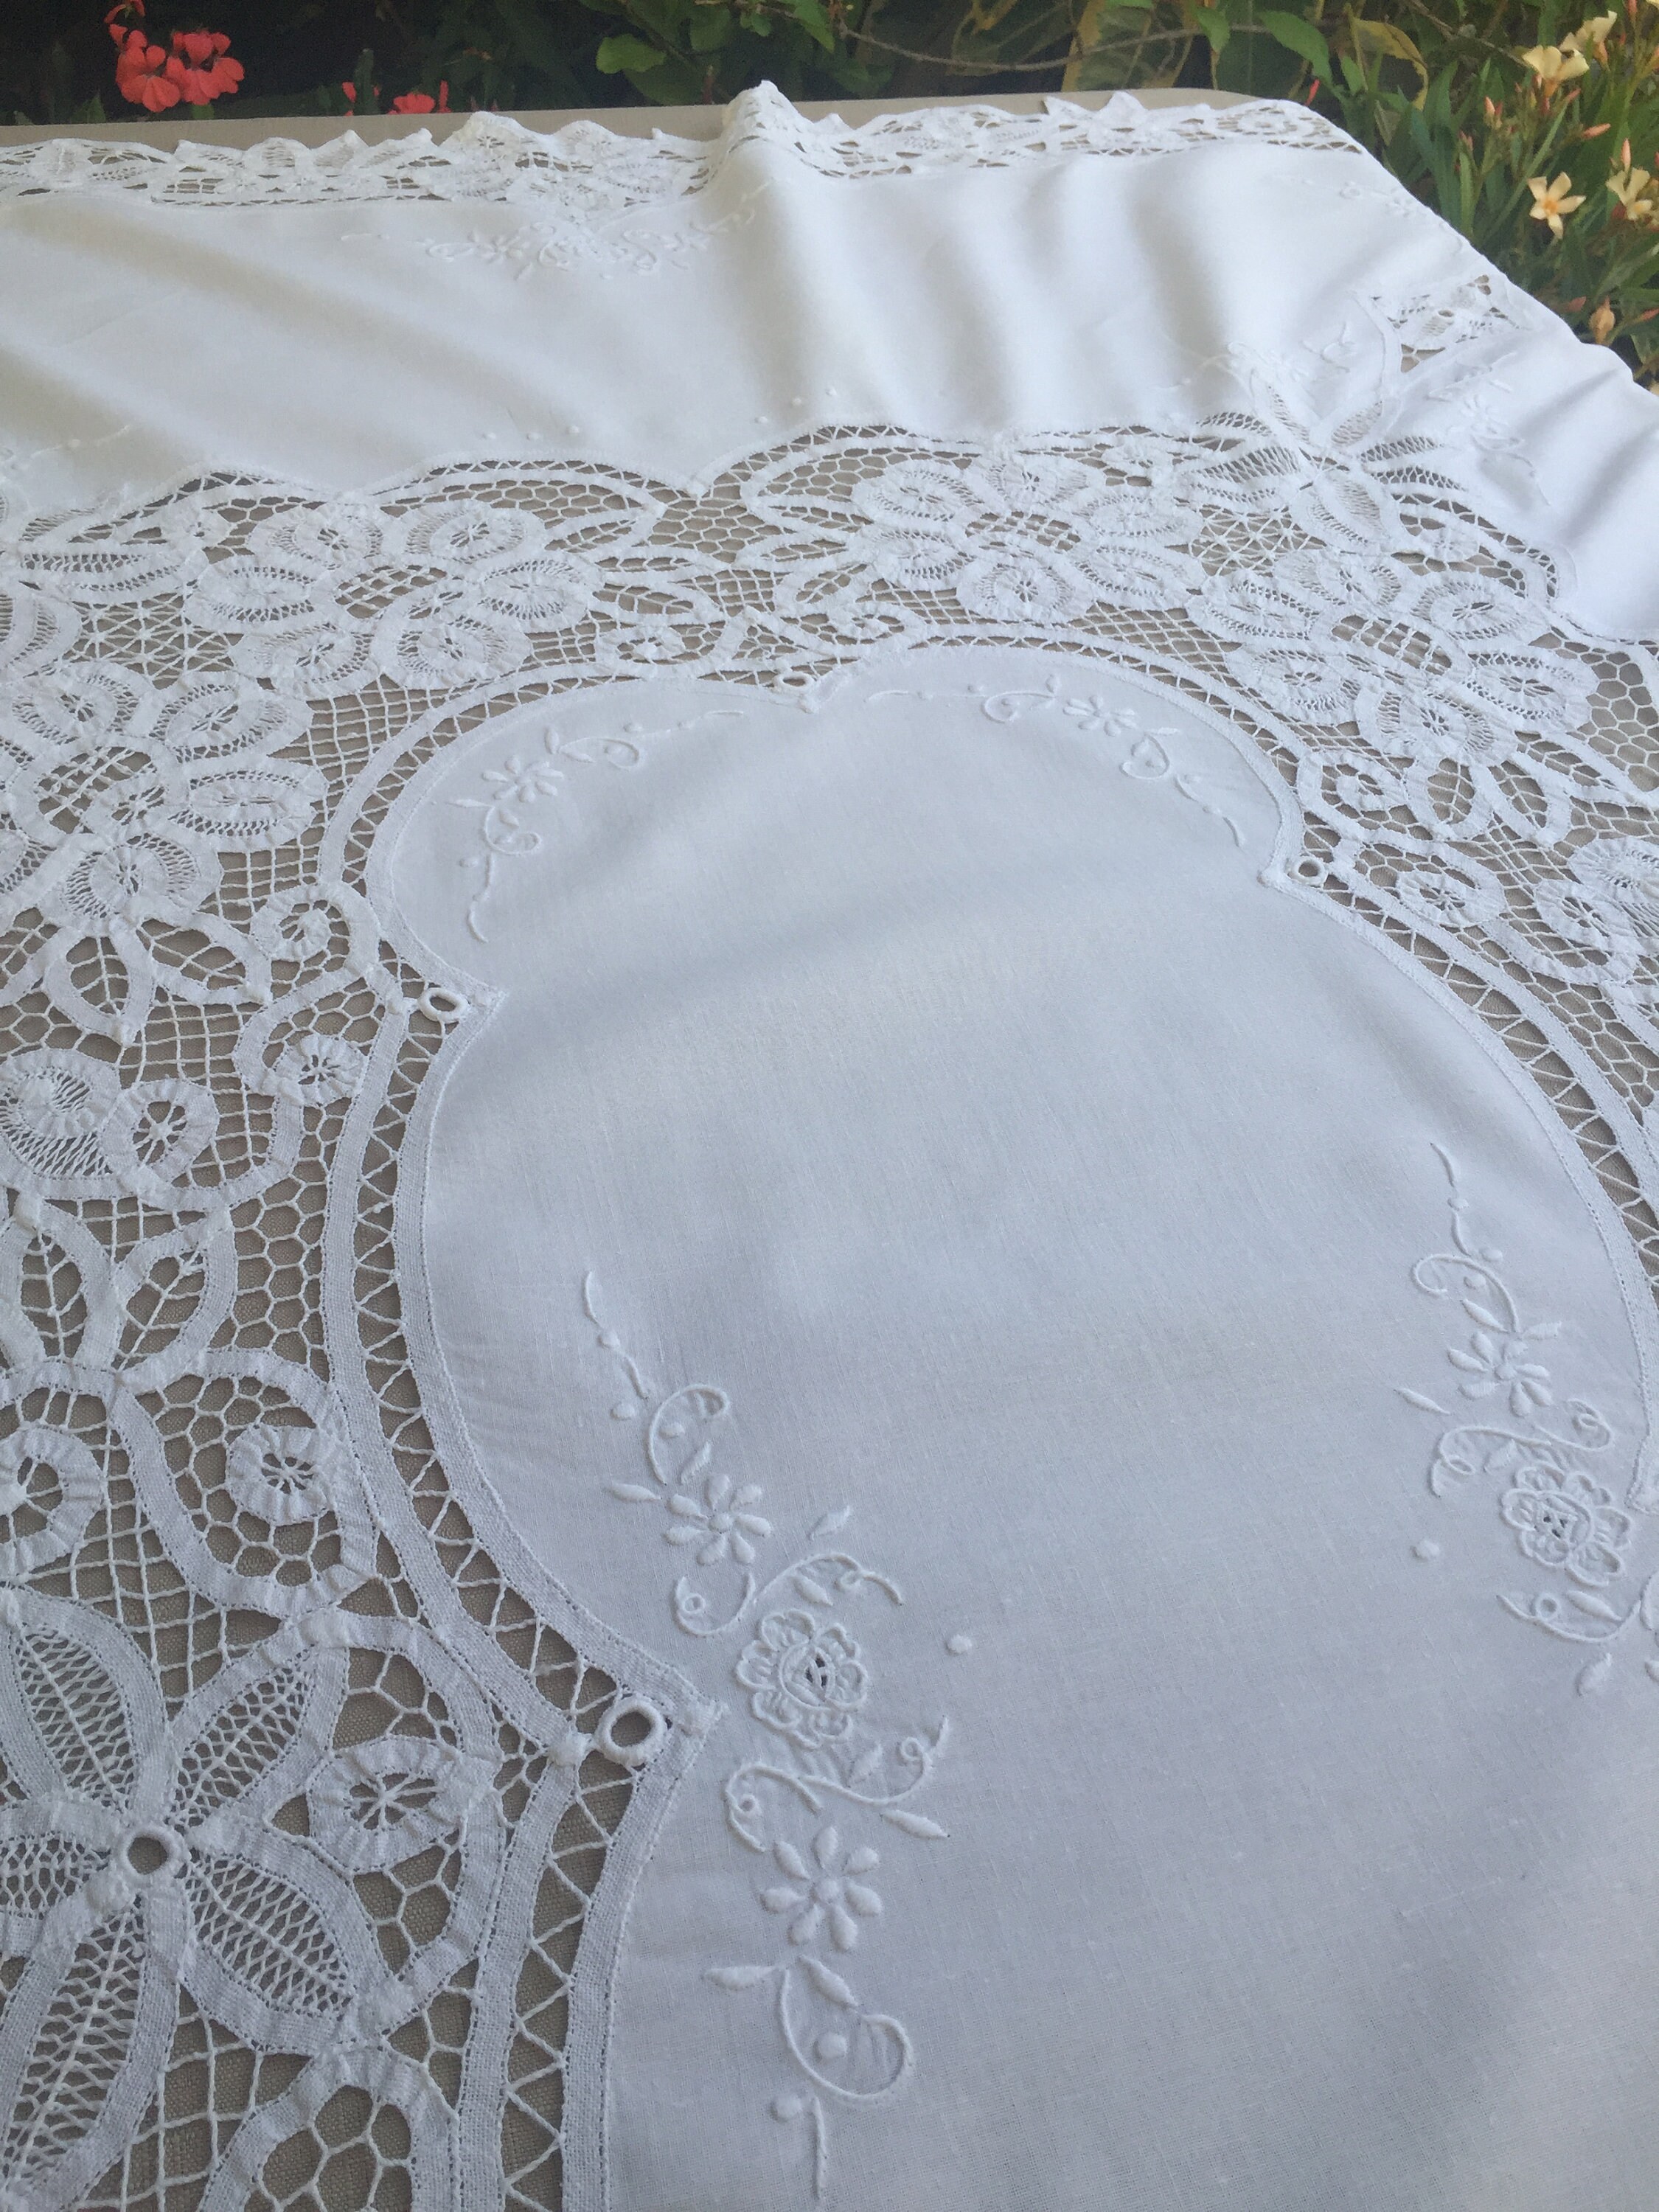 Hand Embroidered White Oblong Tablecloth with Battenburg Lace | Etsy